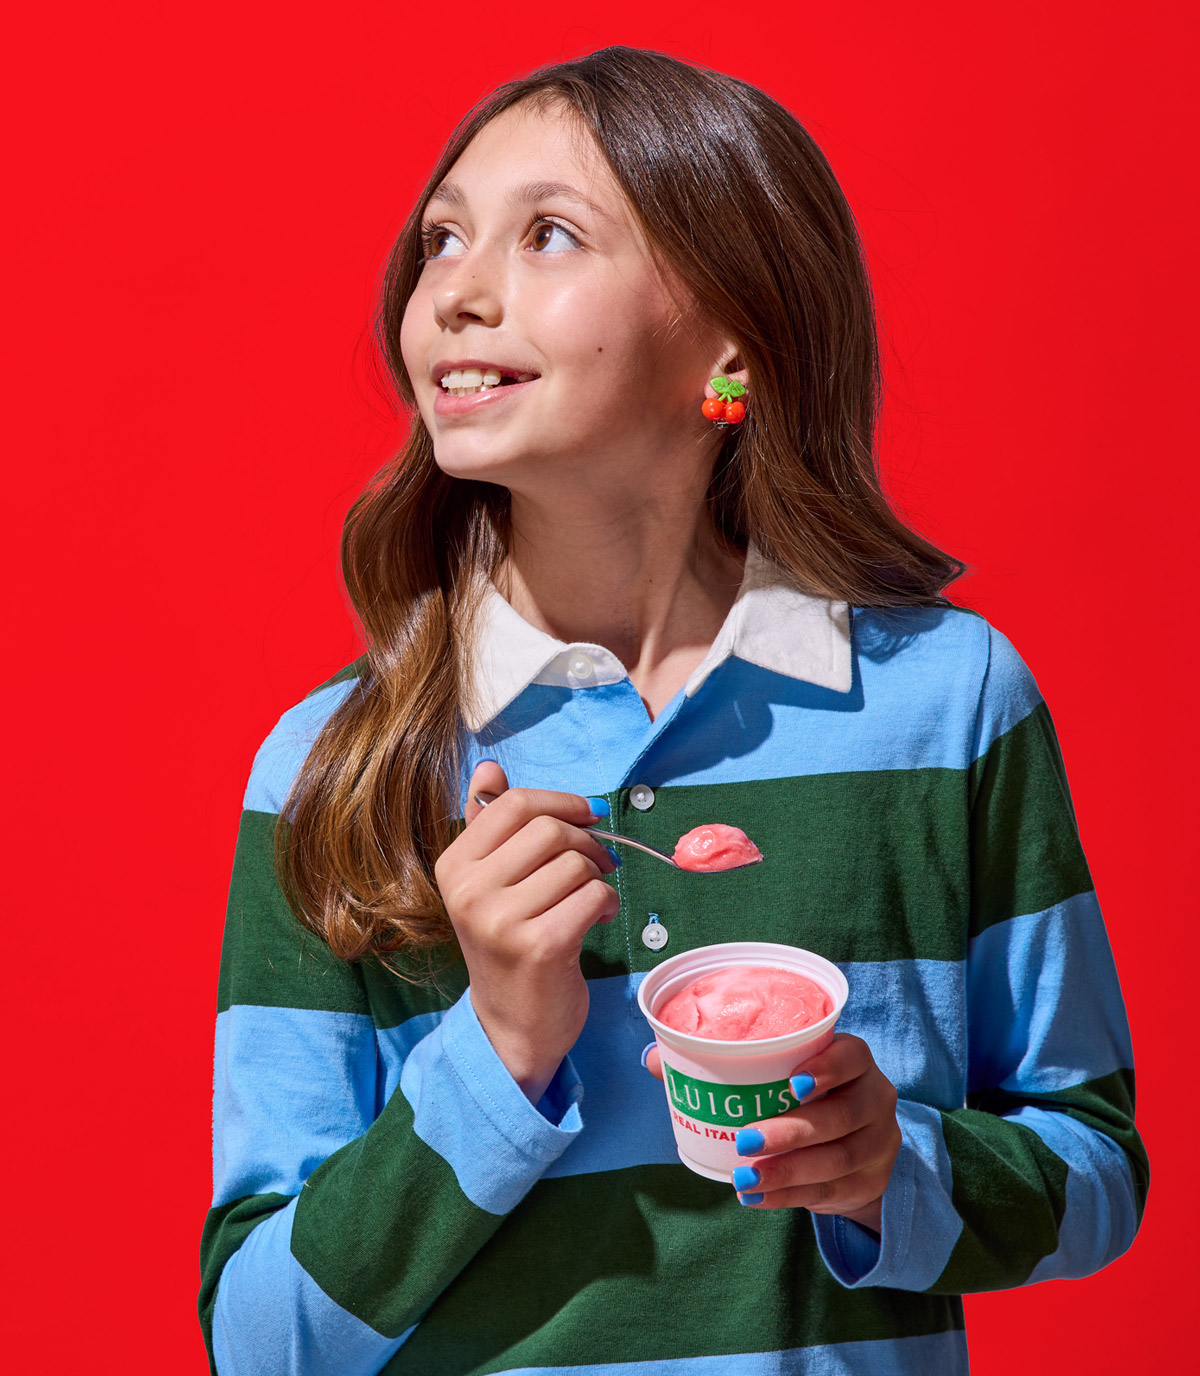 Young girl eating cherry LUIGI'S Real Italian Ice. She is wearing a blue and green rugby shirt and cherry earrings. She's looking over her shoulder, smiling, and holding the cup and spoon in her hand with cherry Italian ice. Background is red.